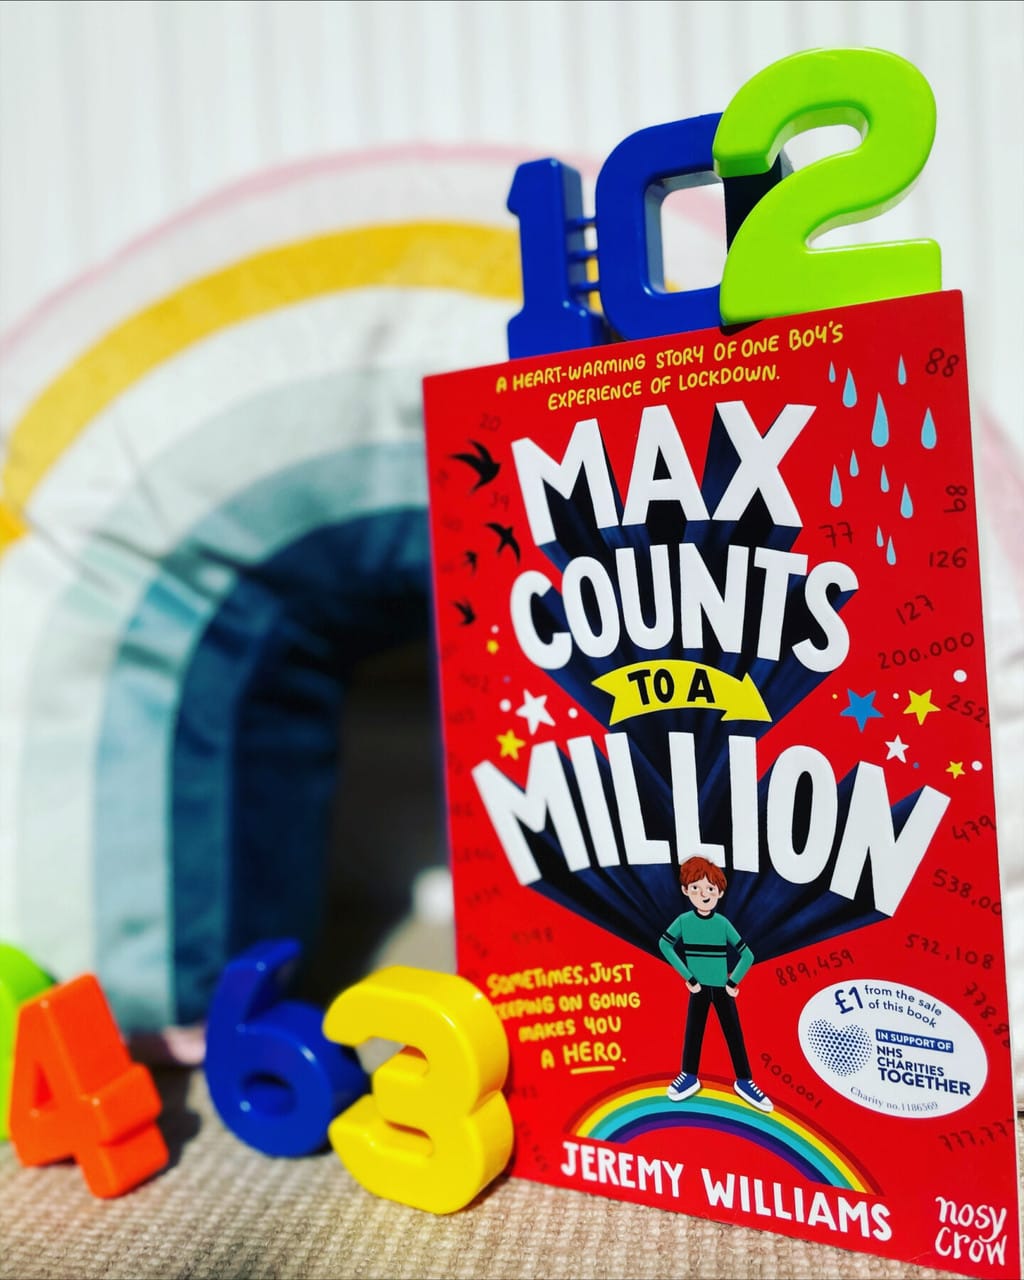 Max Counts to a Million -Jeremy Williams